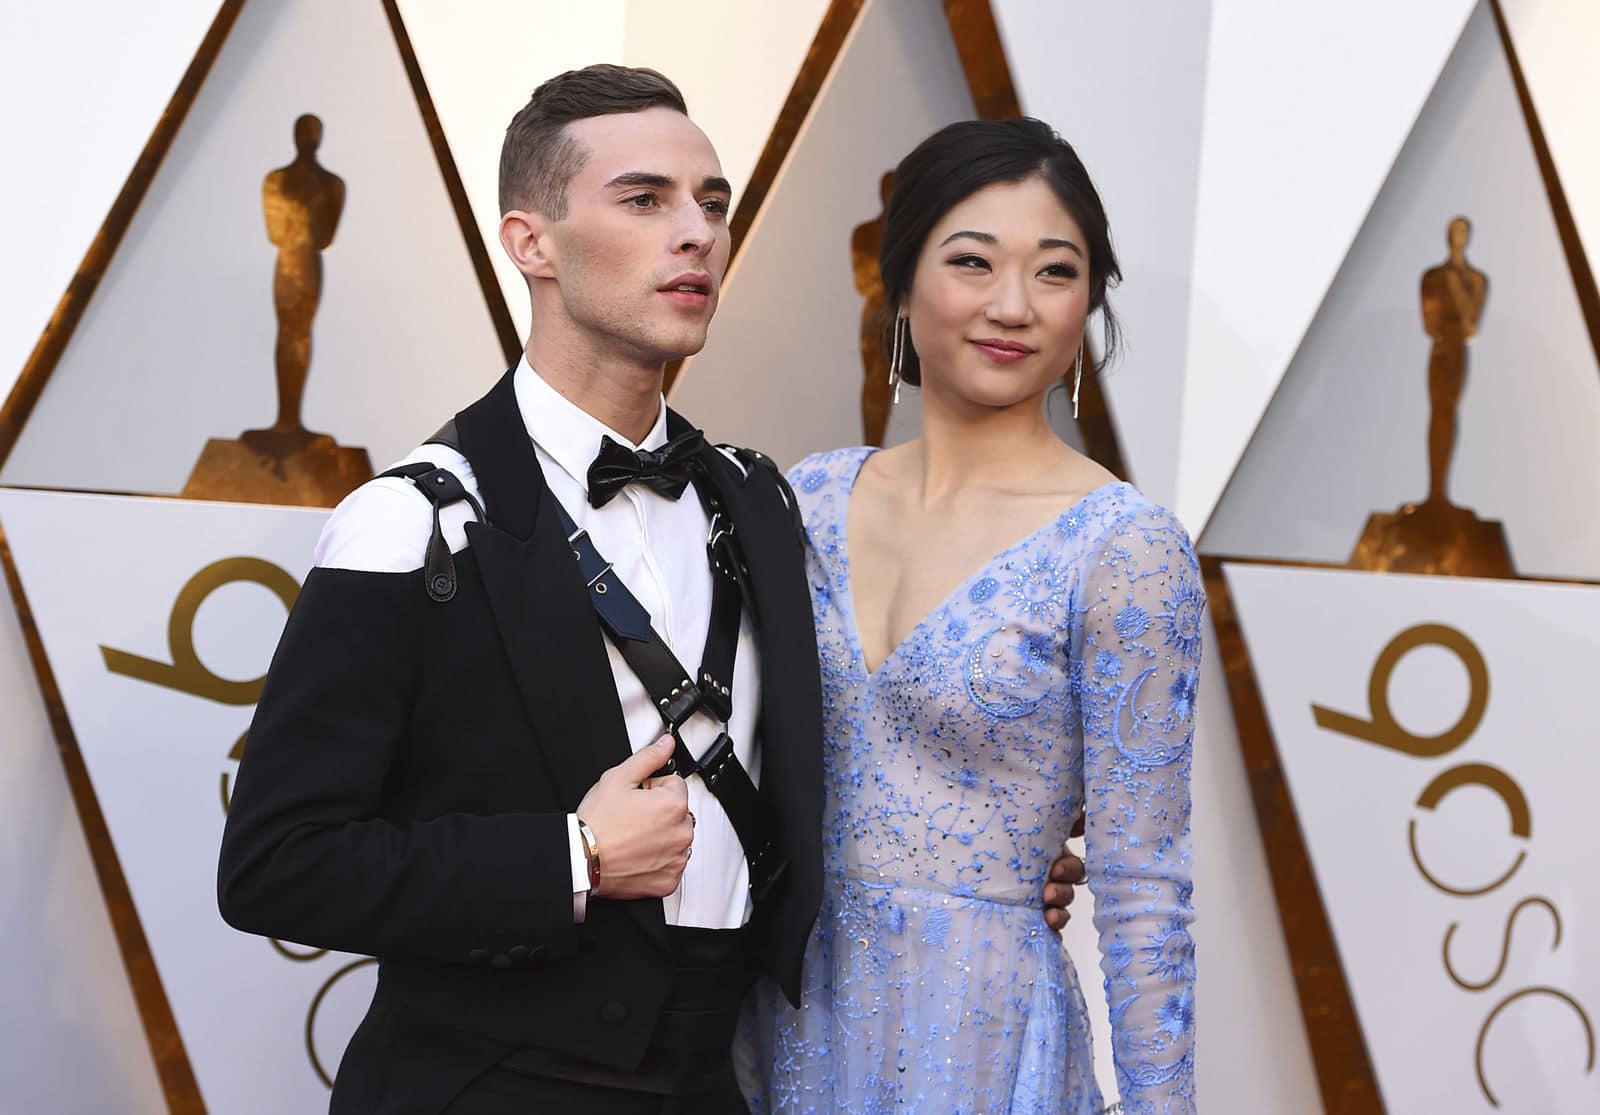 Adam Rippon, left, and Mirai Nagasu arrive at the Oscars on Sunday, March 4, 2018, at the Dolby Theatre in Los Angeles. (Photo by Jordan Strauss/Invision/AP)